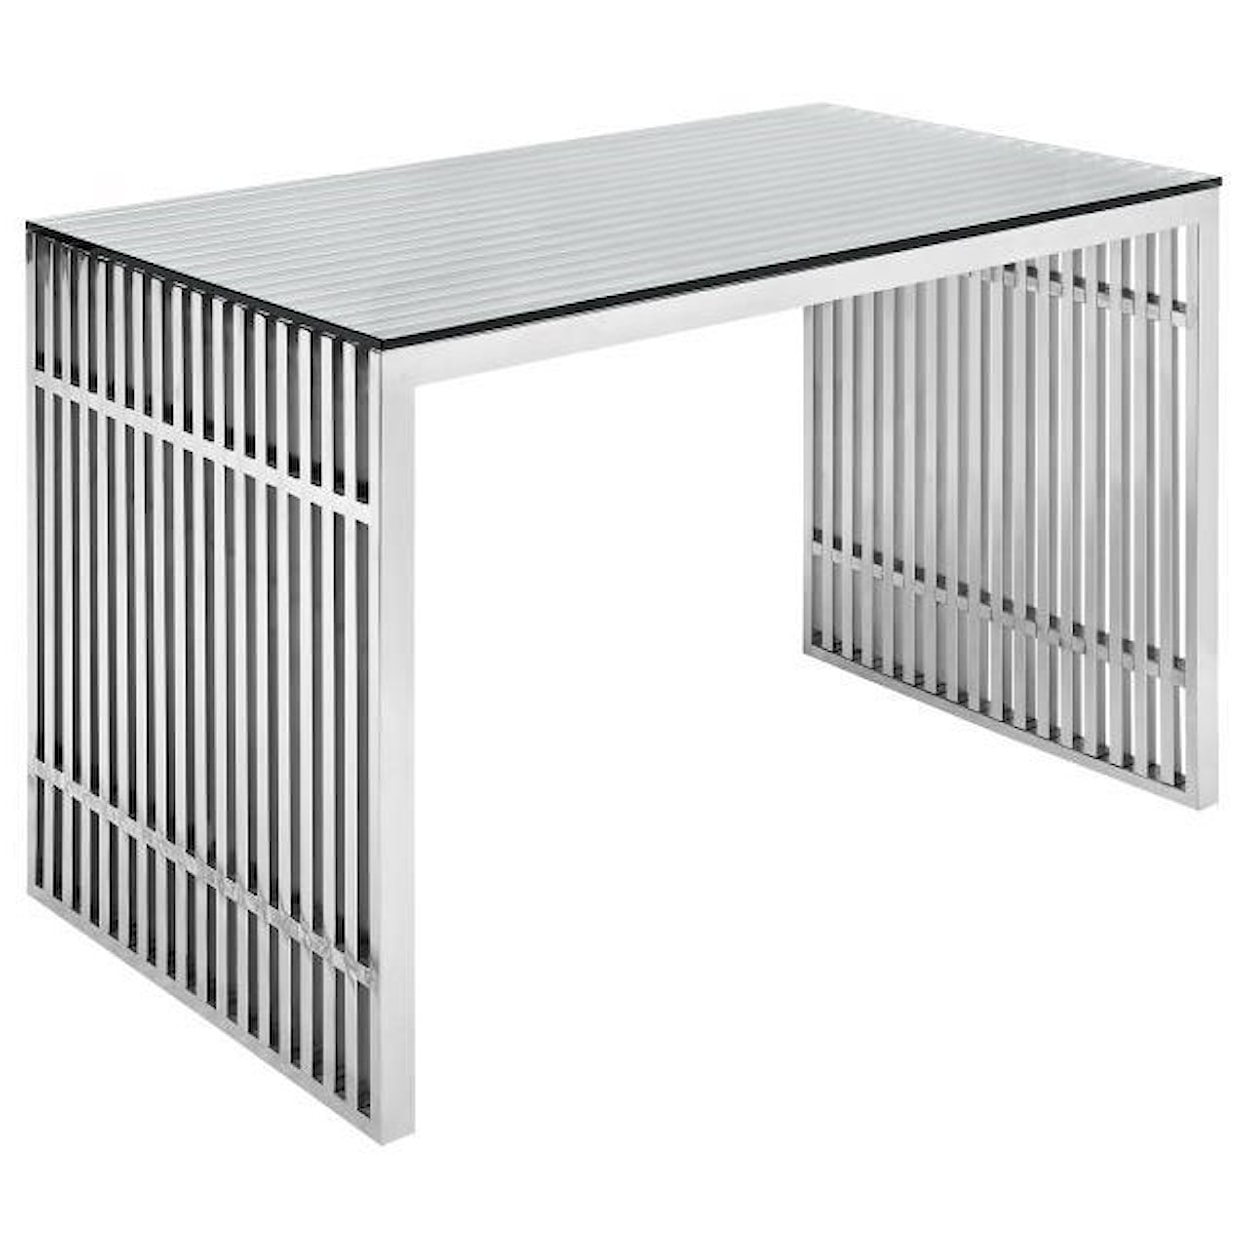 Modway Home Office Gridiron Stainless Steel Office Desk